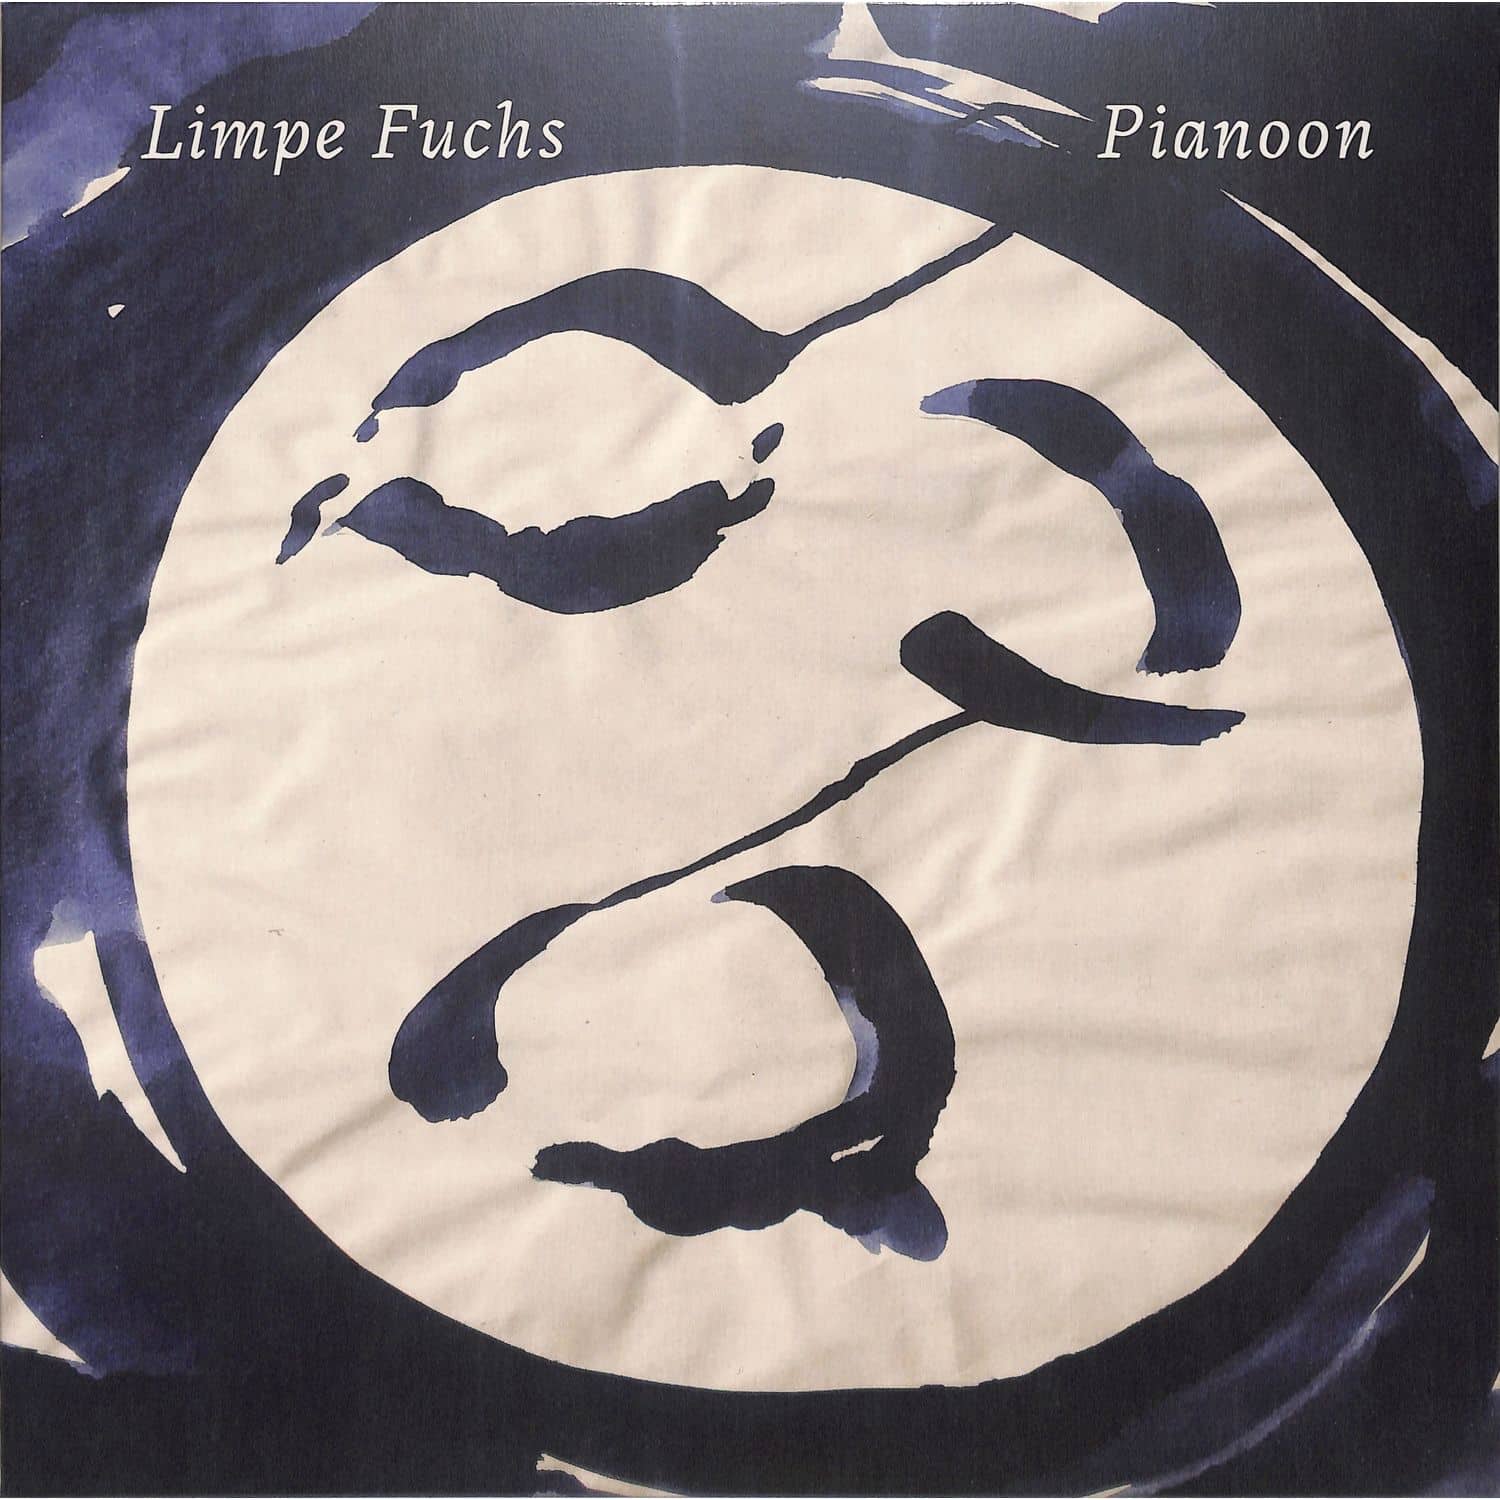 Limpe Fuchs - PIANOON 